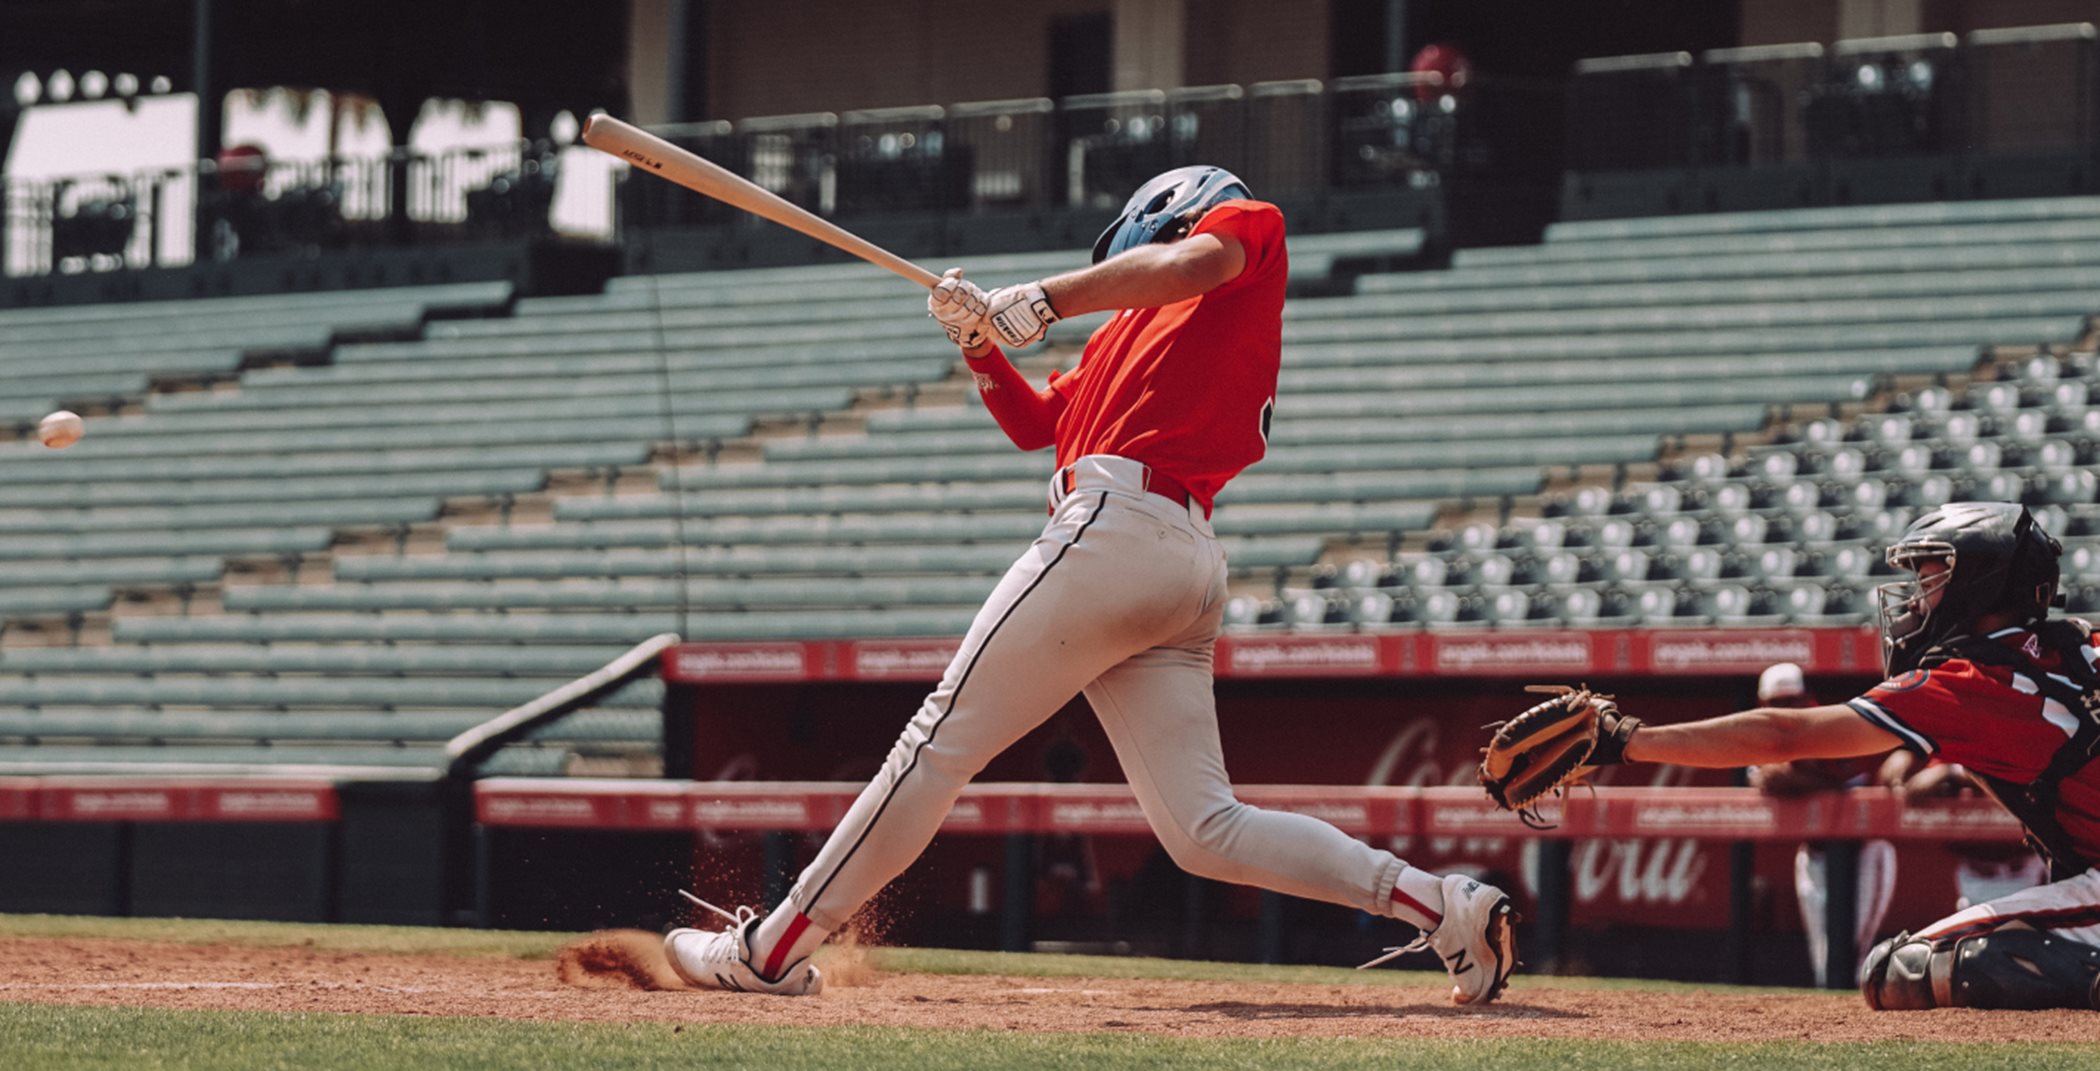 Two baseball players. One is swinging the bat while the other sits behind him, poised to catch the ball.